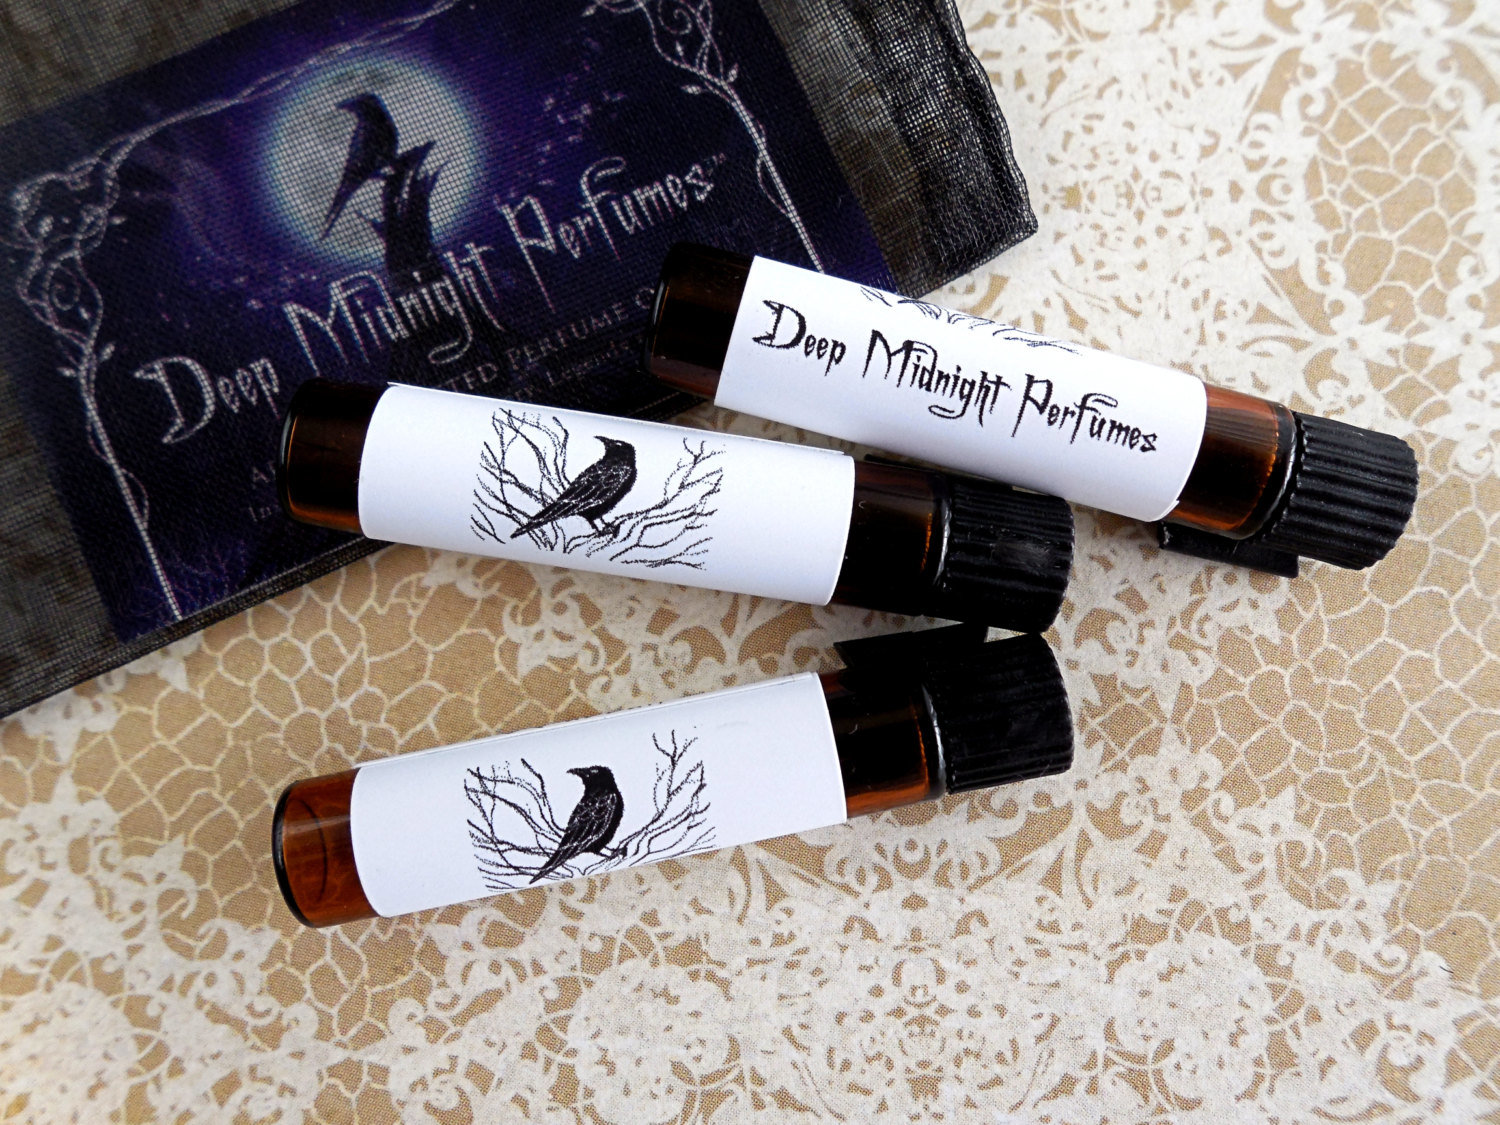 PERFUME SAMPLES by Deep Midnight Perfumes, CHOOSE Your Own Sampler Set of 3 Vials